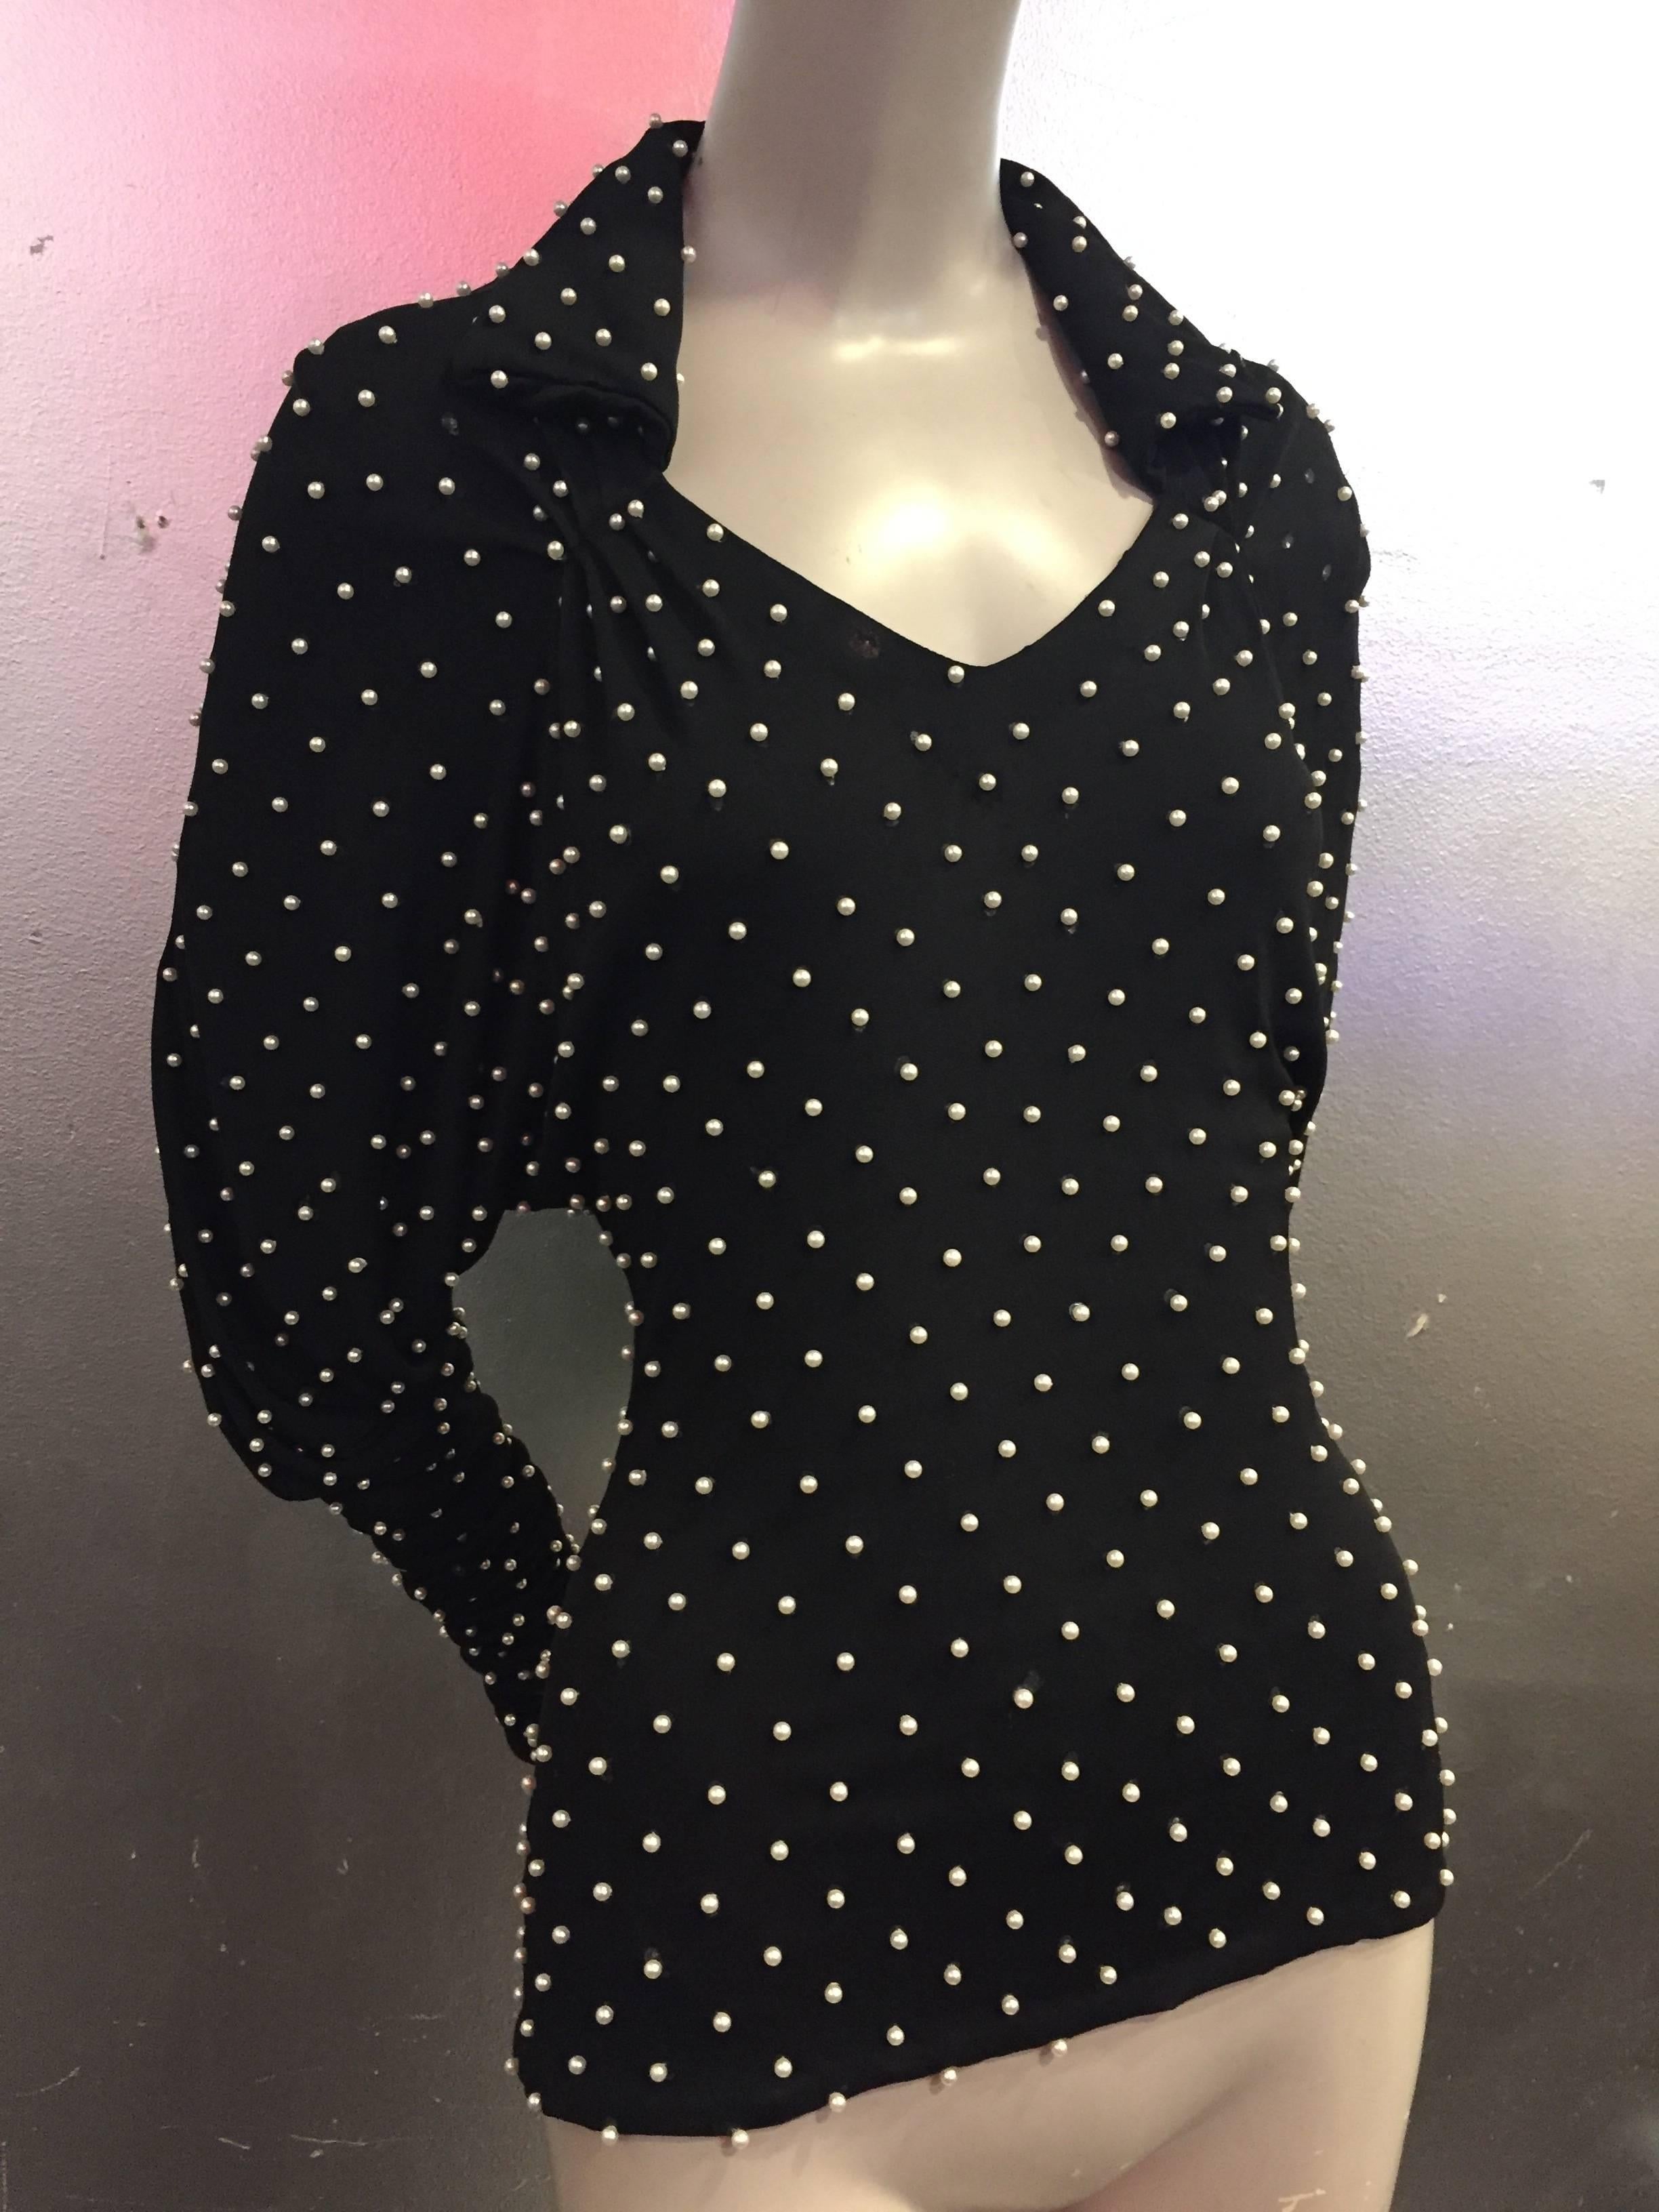 A fabulous 1980s Norma Kamali black matte rayon jersey blouse with collar, v-neck and Dolman push-up sleeves entirely studded with white pearls.  Sleeves are 43